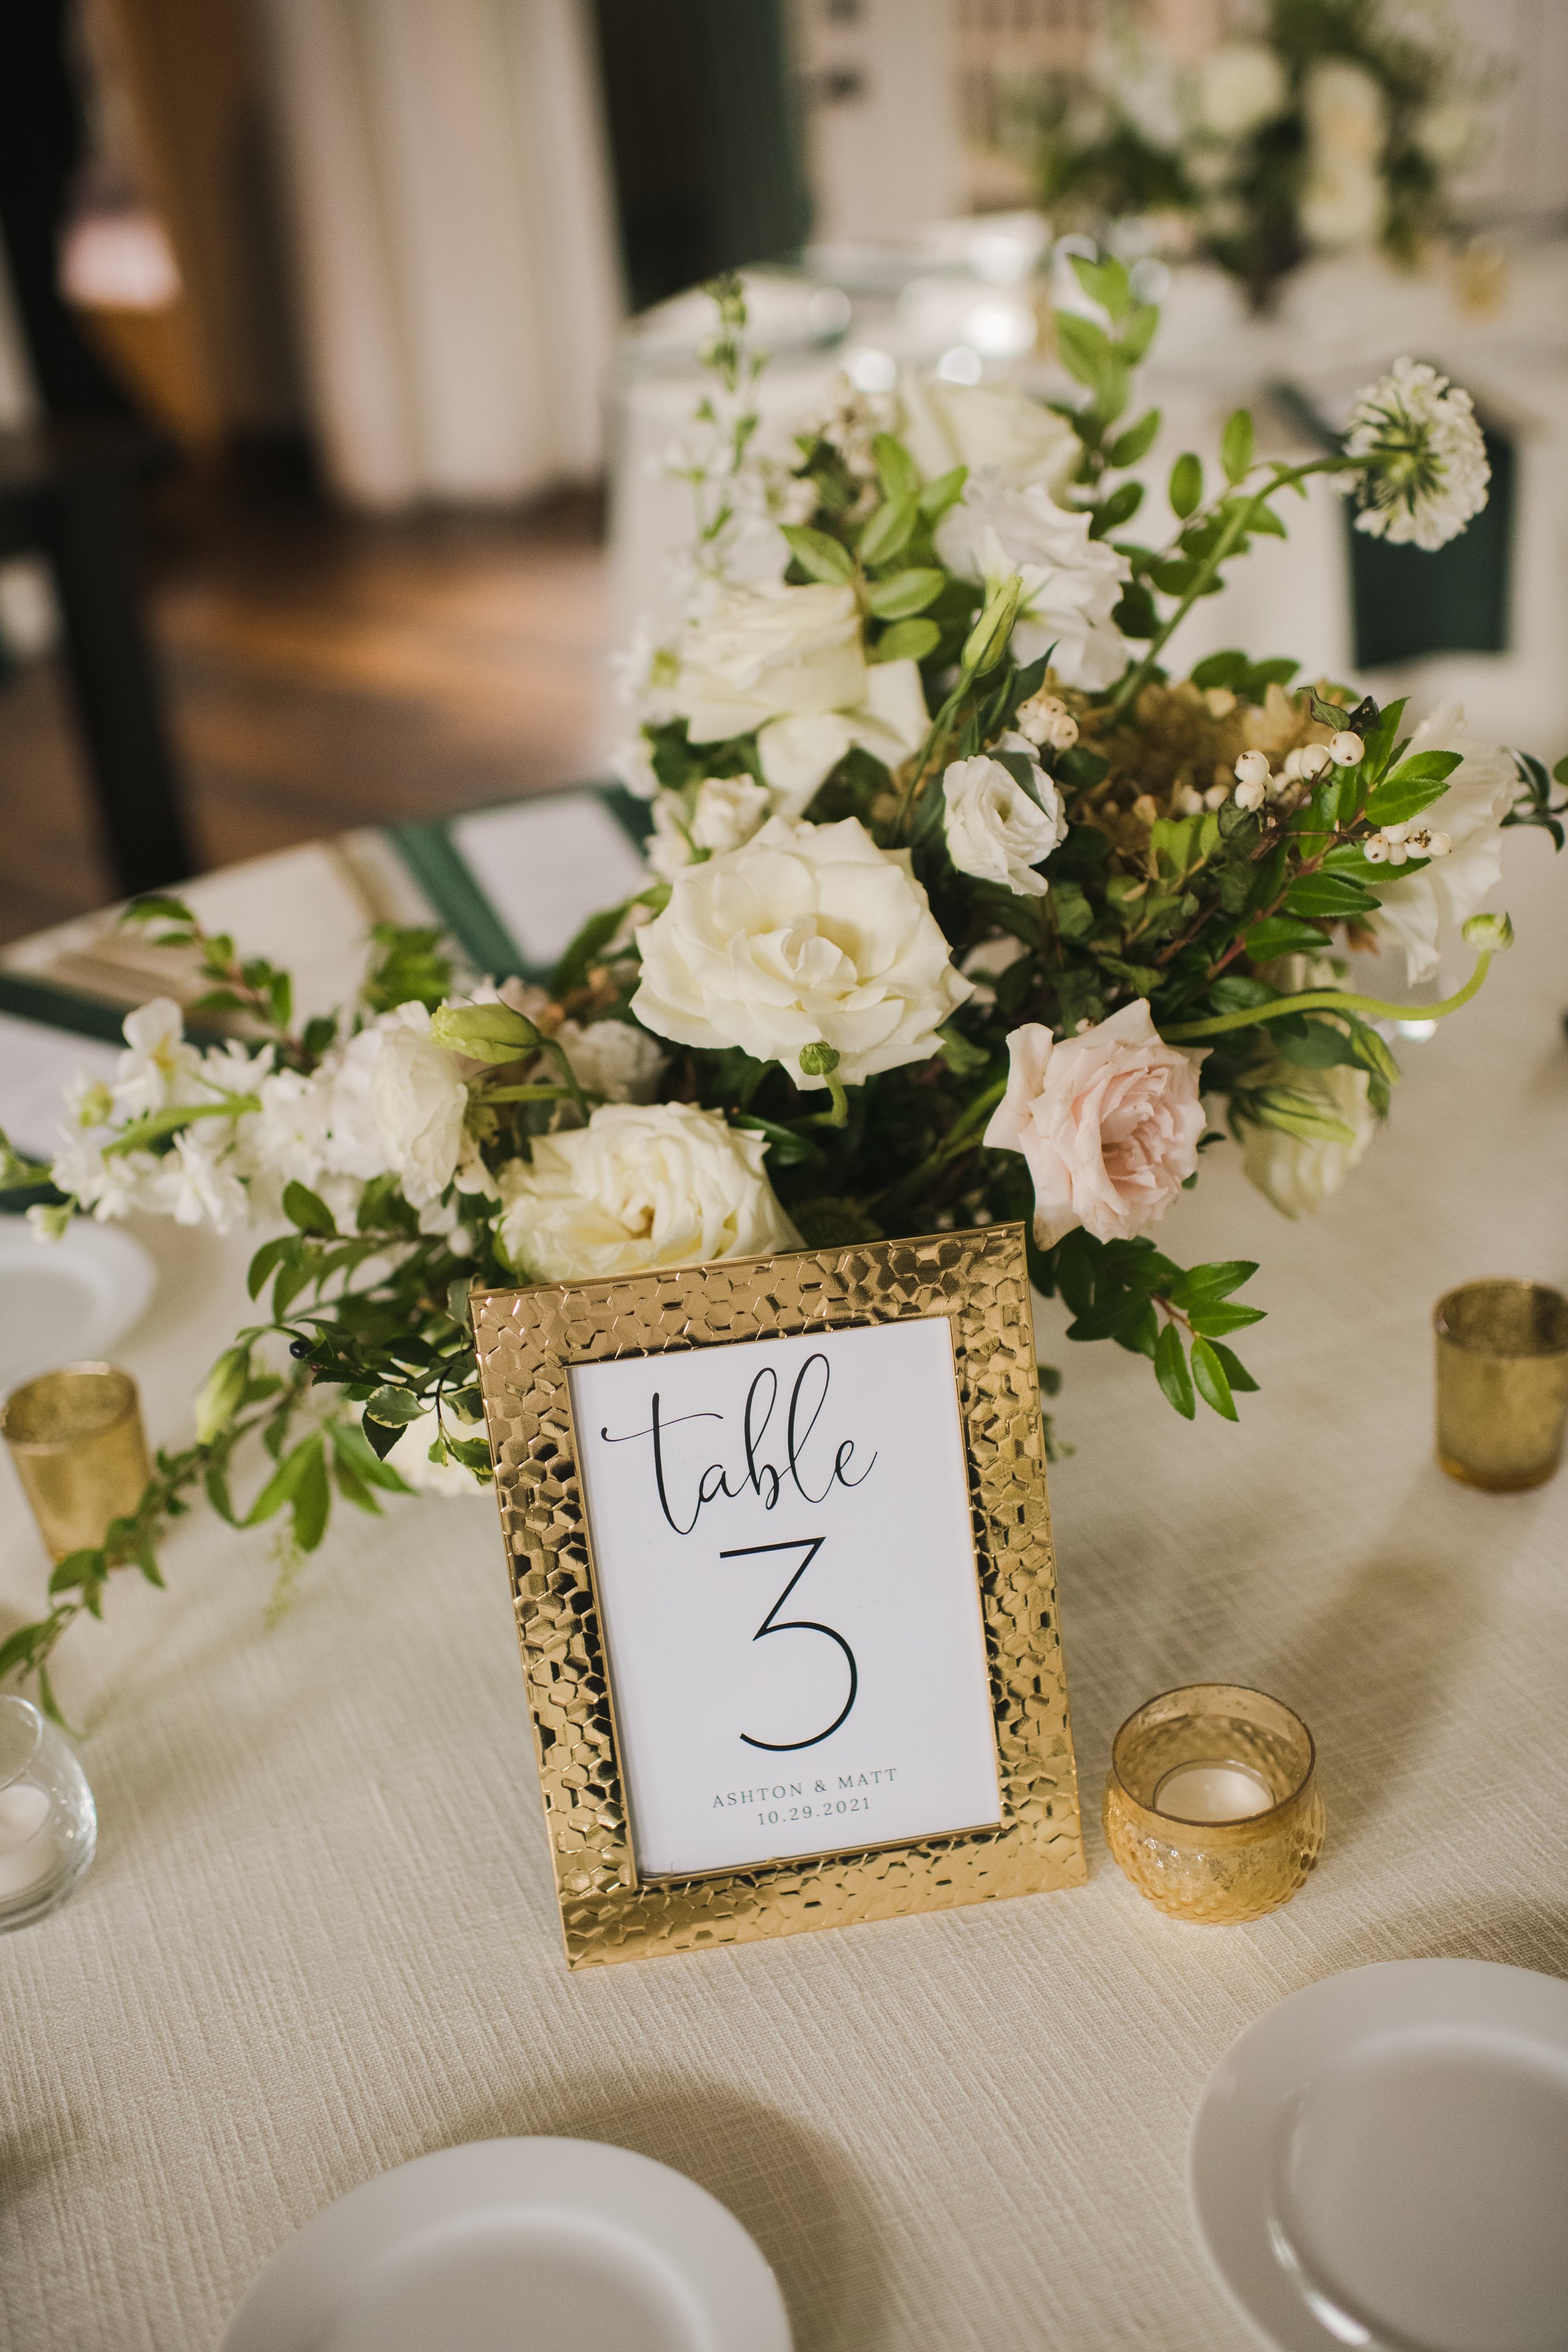 Low floral centerpieces for elegant winter wedding overflowing with white garden roses, dried hydrangeas, scabiosa, berries, lisianthus, ranunculus, and natural dark greenery. Designed by Rosemary and Finch in Nashville, TN.